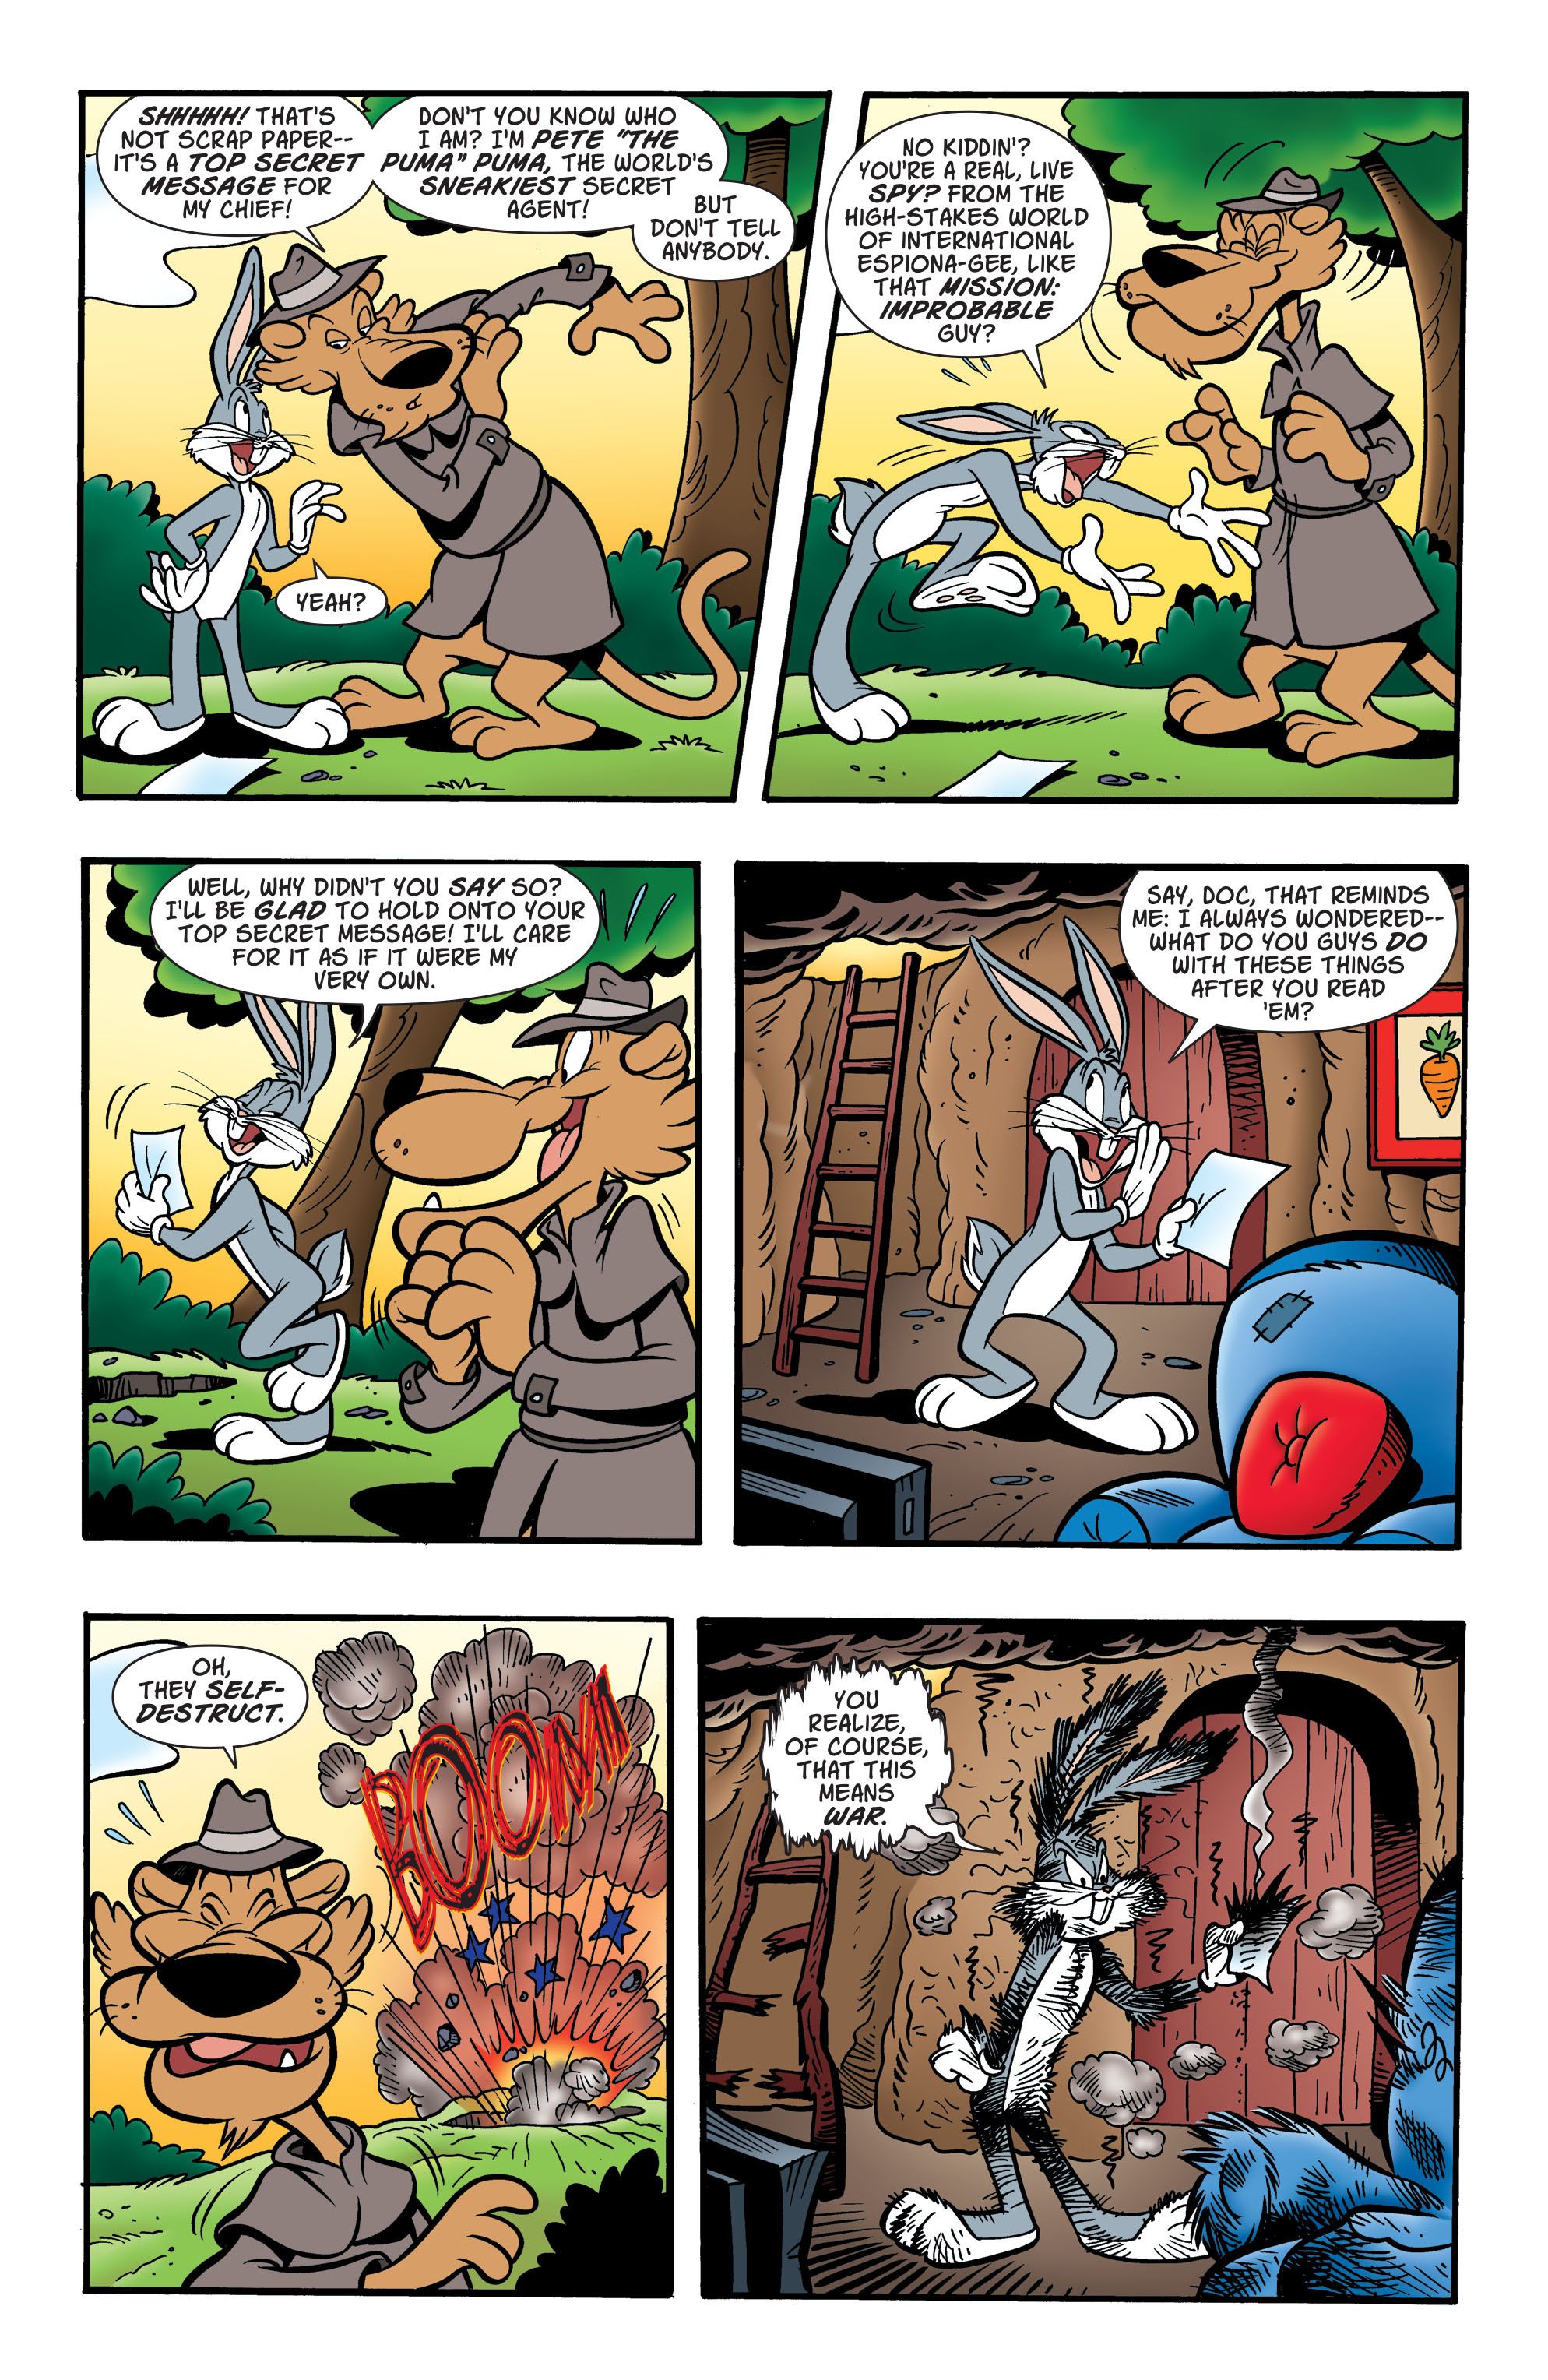 Looney Tunes (1994-): Chapter 232 - Page 3